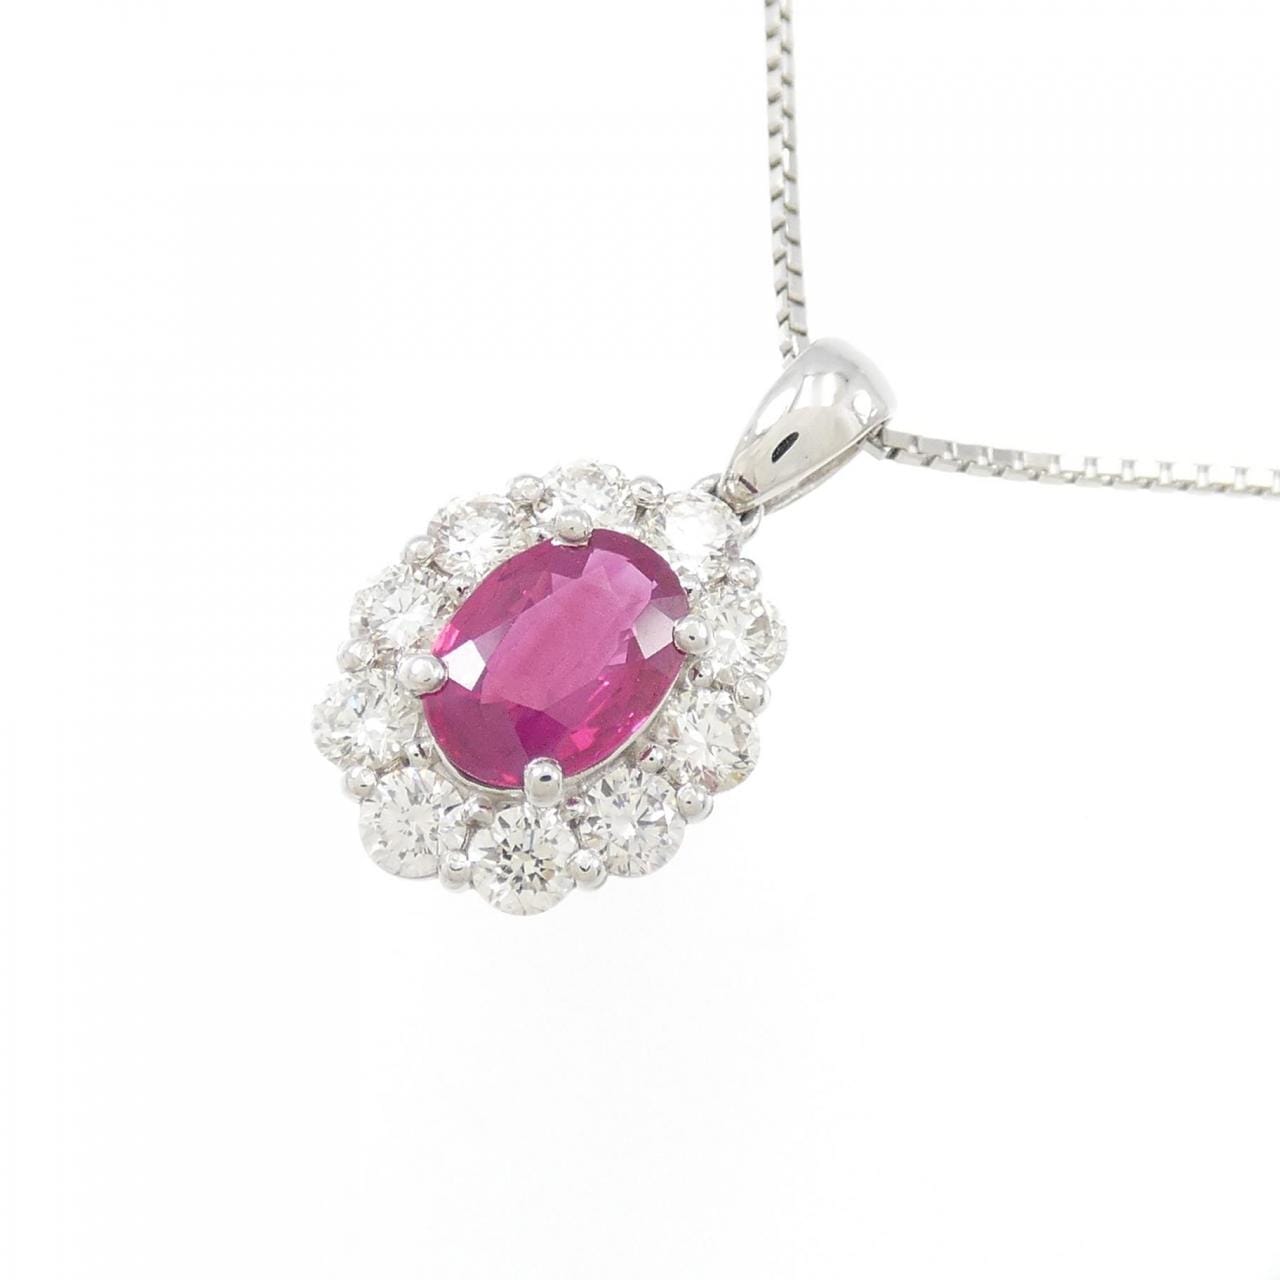 [Remake] PT Ruby Necklace 0.90CT Made in Burma